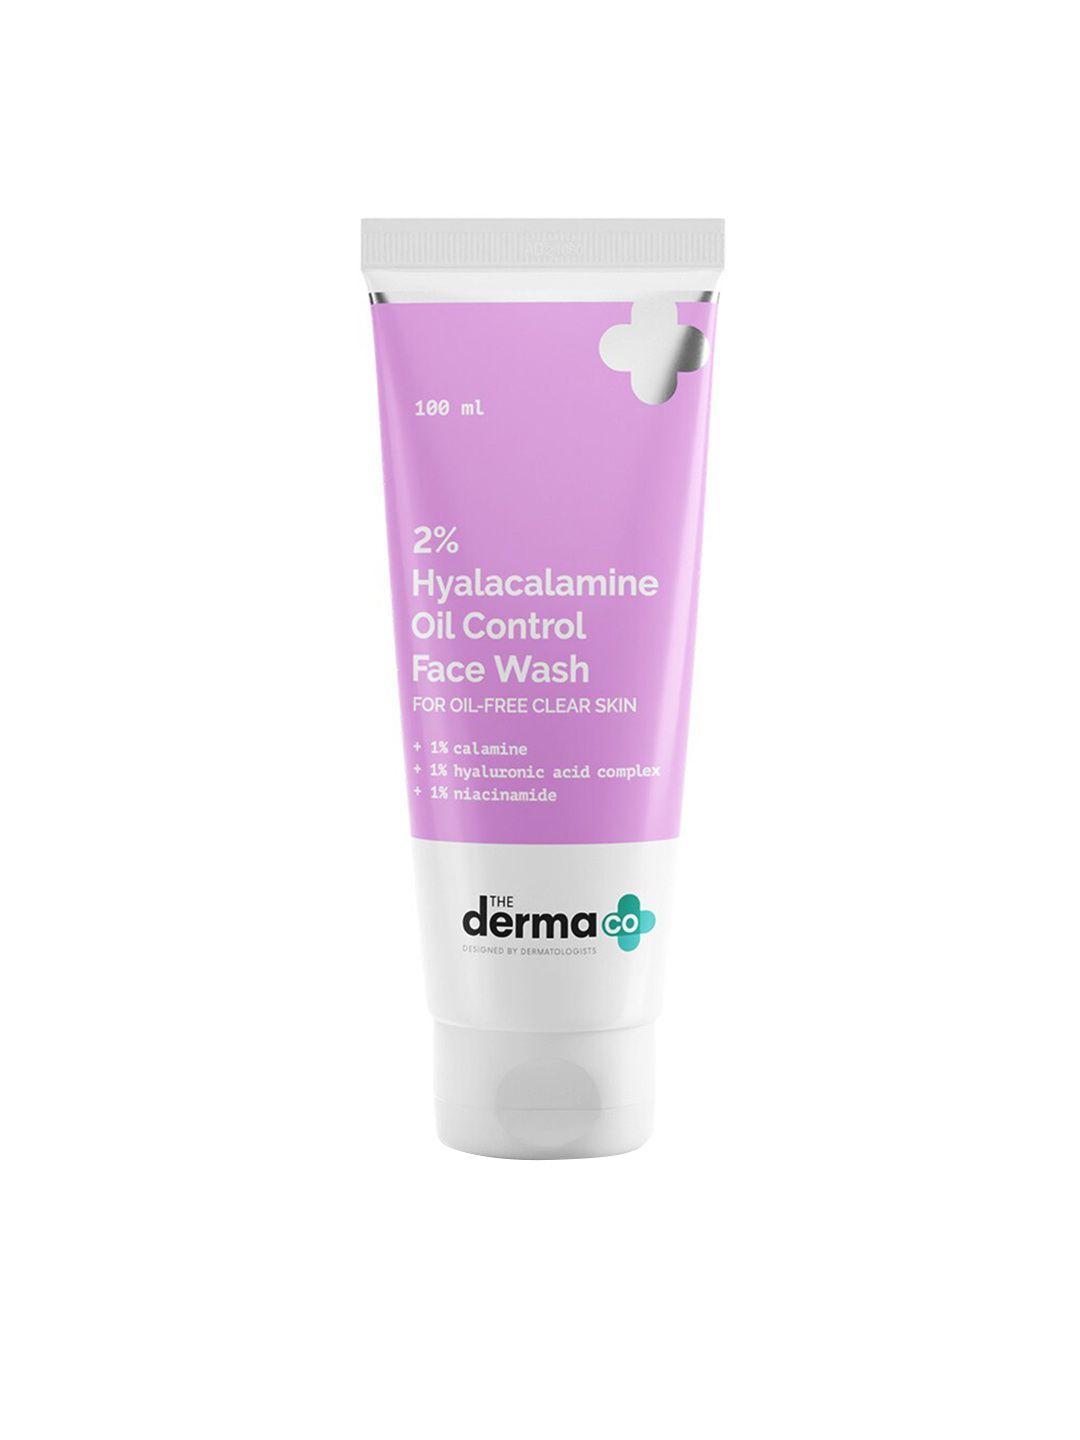 the derma co. 2% hyalacalamine oil control face wash with niacinamide - 100 ml